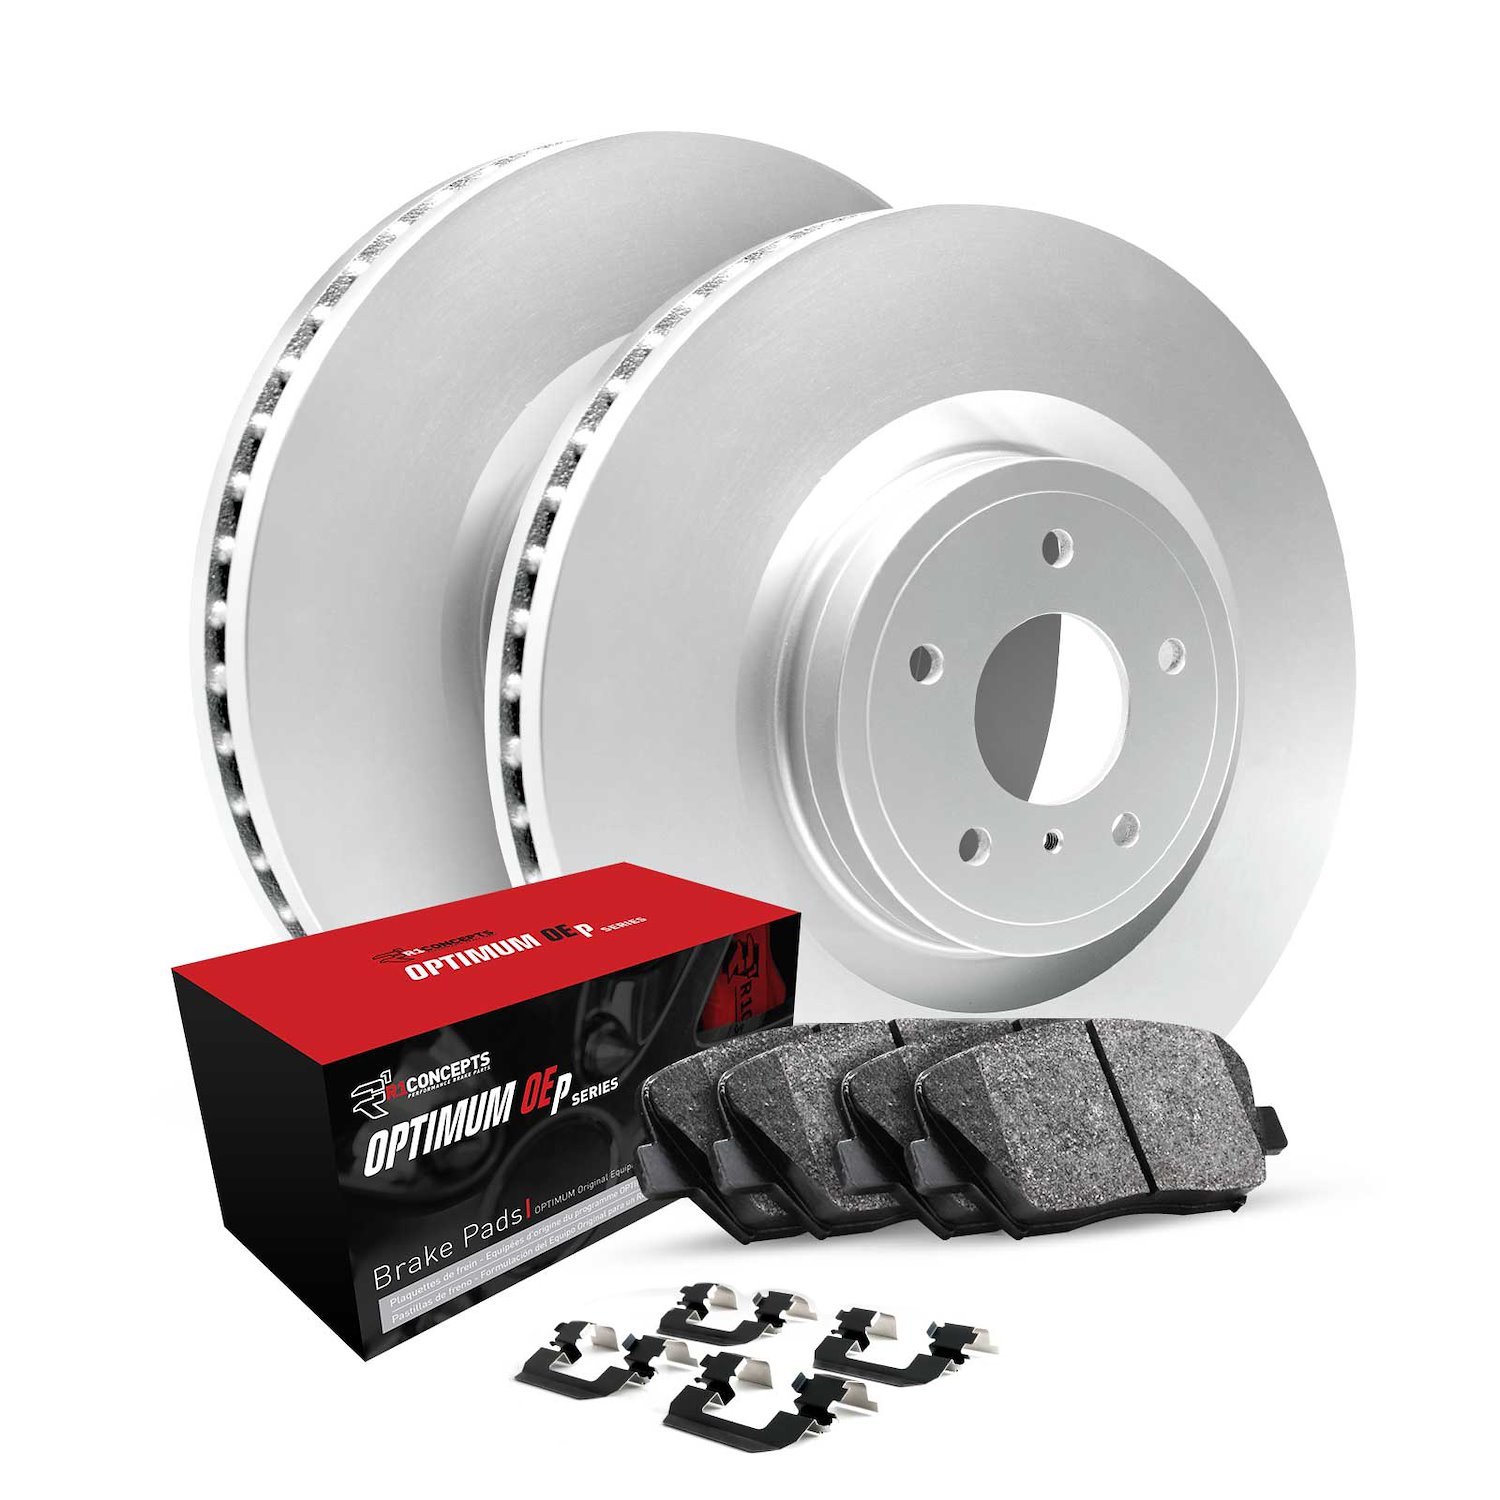 GEO-Carbon Brake Rotors w/5000 Oep Pads & Hardware Kit, Fits Select Fits Multiple Makes/Models, Position: Rear